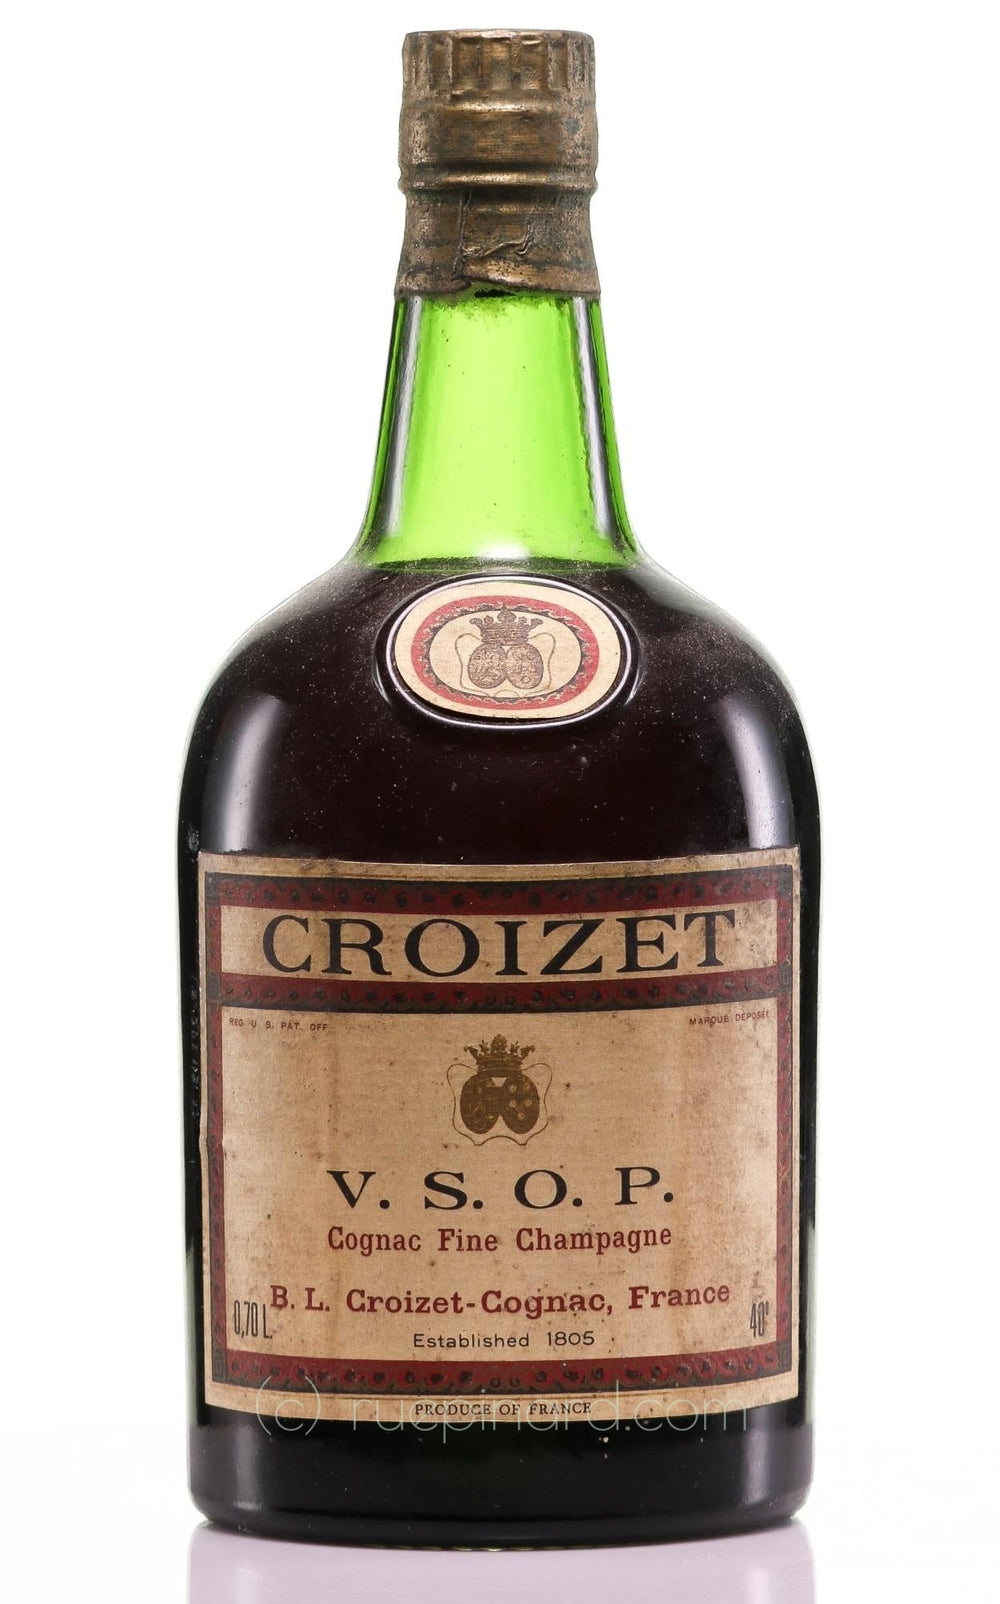 Croizet B. Léon V.S.O.P. Cognac 1920, Aged 40yrs, Bottled 1960s, Rated 95 by Wine Spectator - Rue Pinard